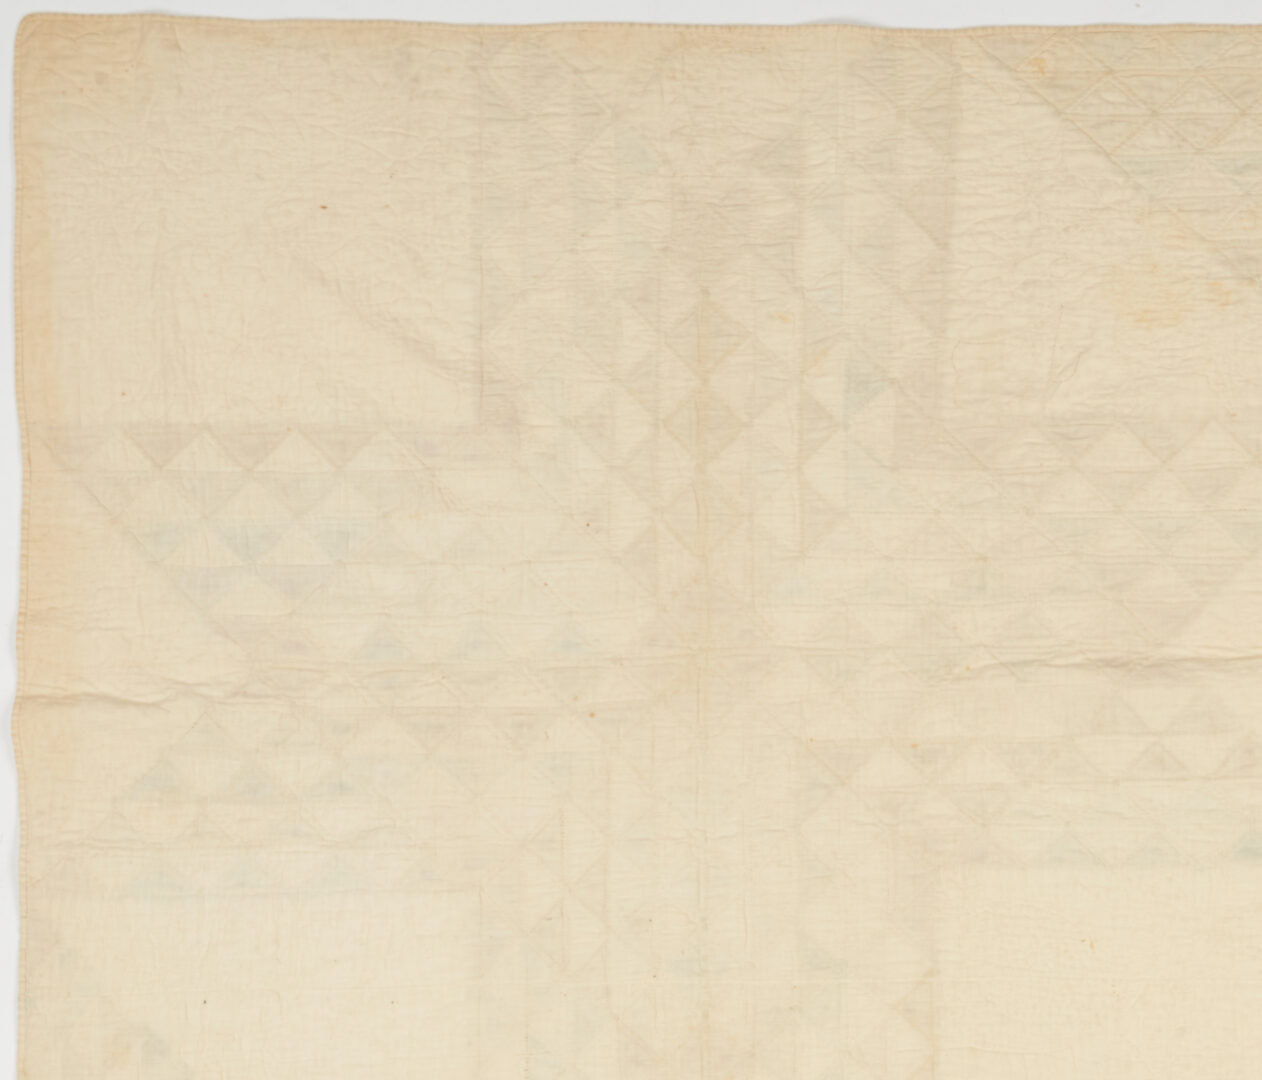 Lot 942: American Eight Pointed Star Quilt, 1840s